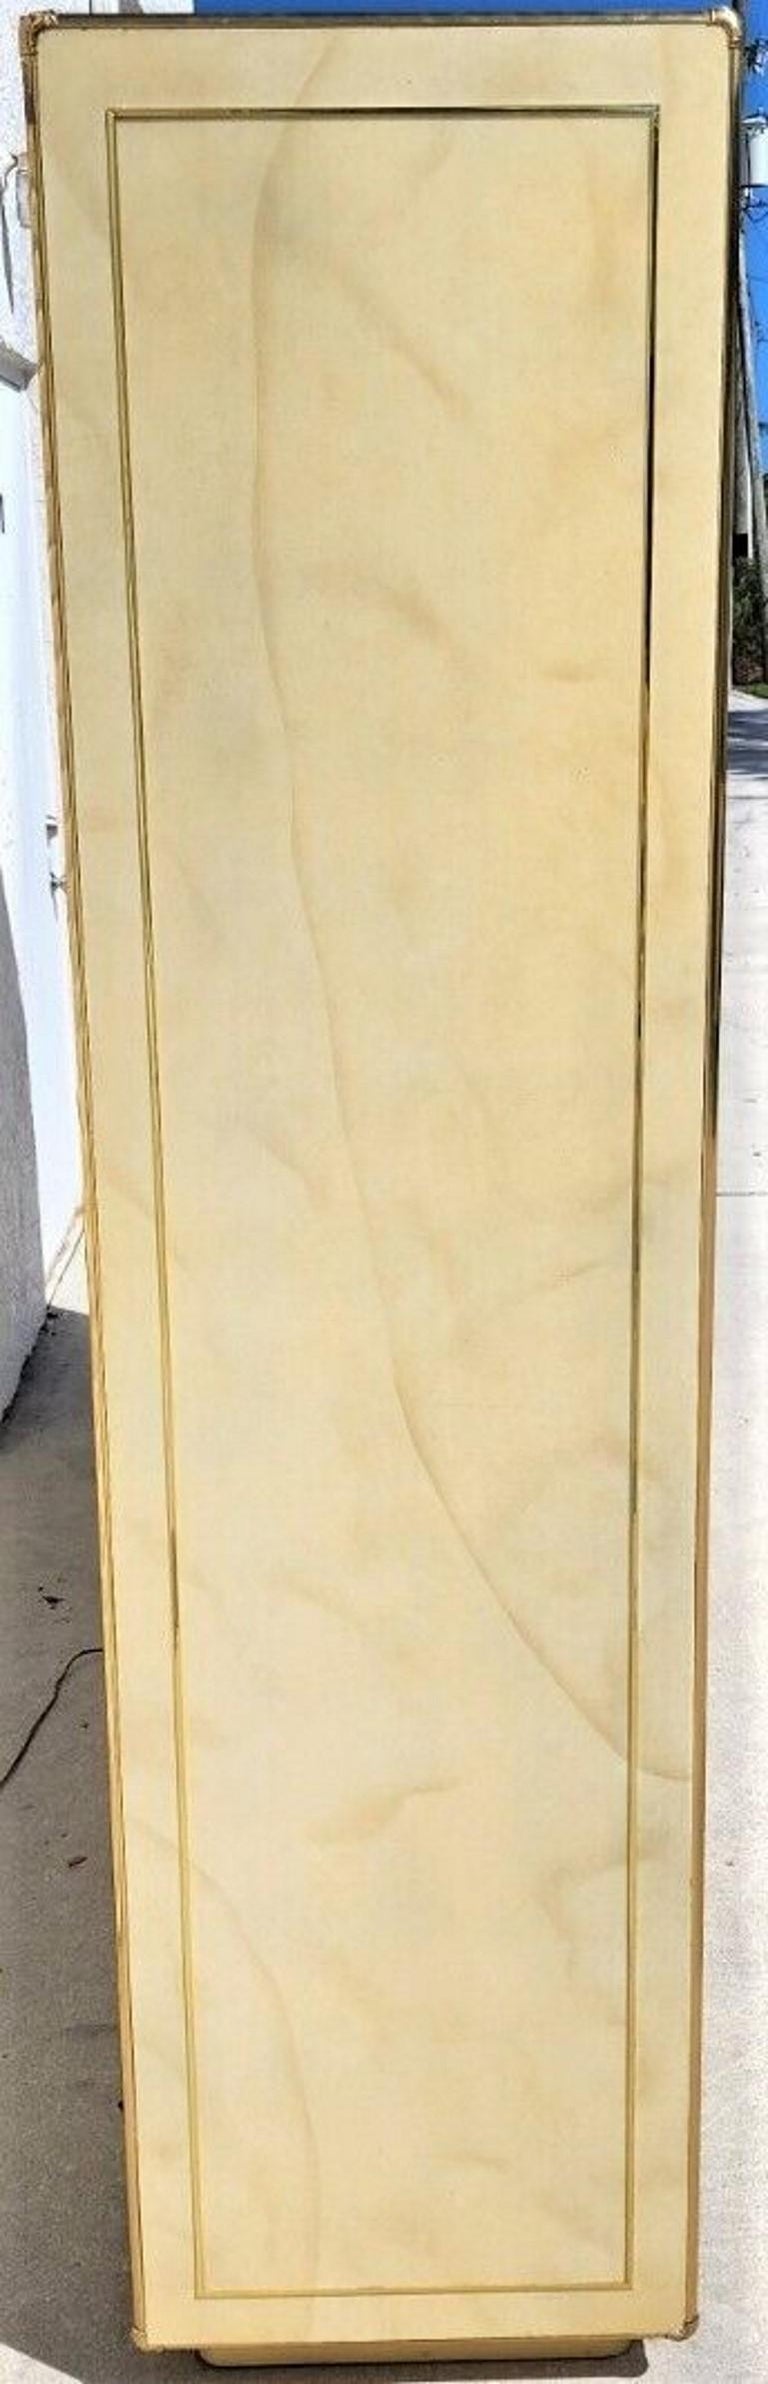 Late 20th Century Faux Goatskin Display Etagere Bar Cabinets by JOHN STUART For Sale